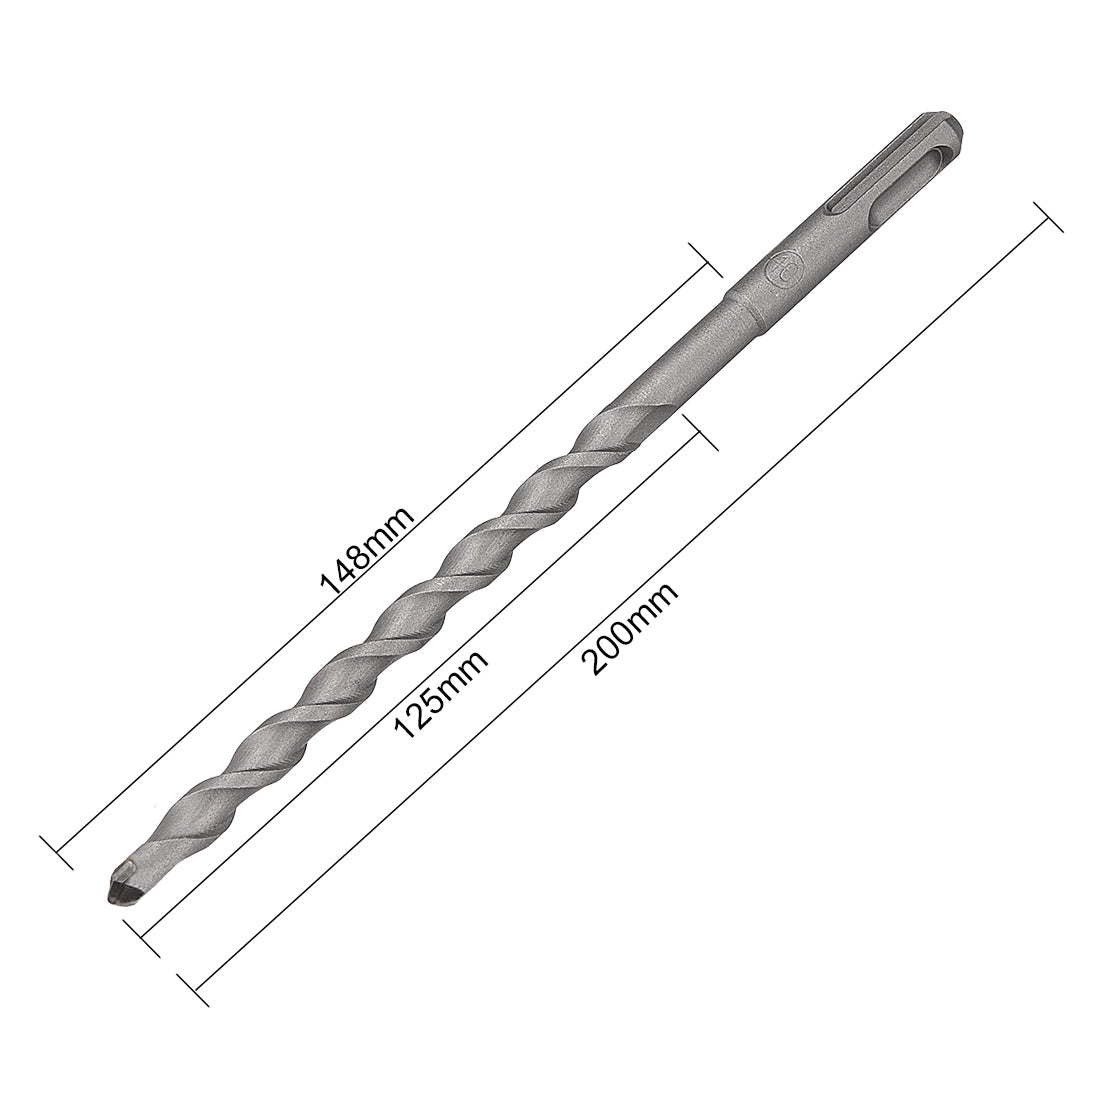 uxcell Uxcell Masonry Drill Bit 10mmx200mm Round Shank 125mm Drilling for Impact Drill